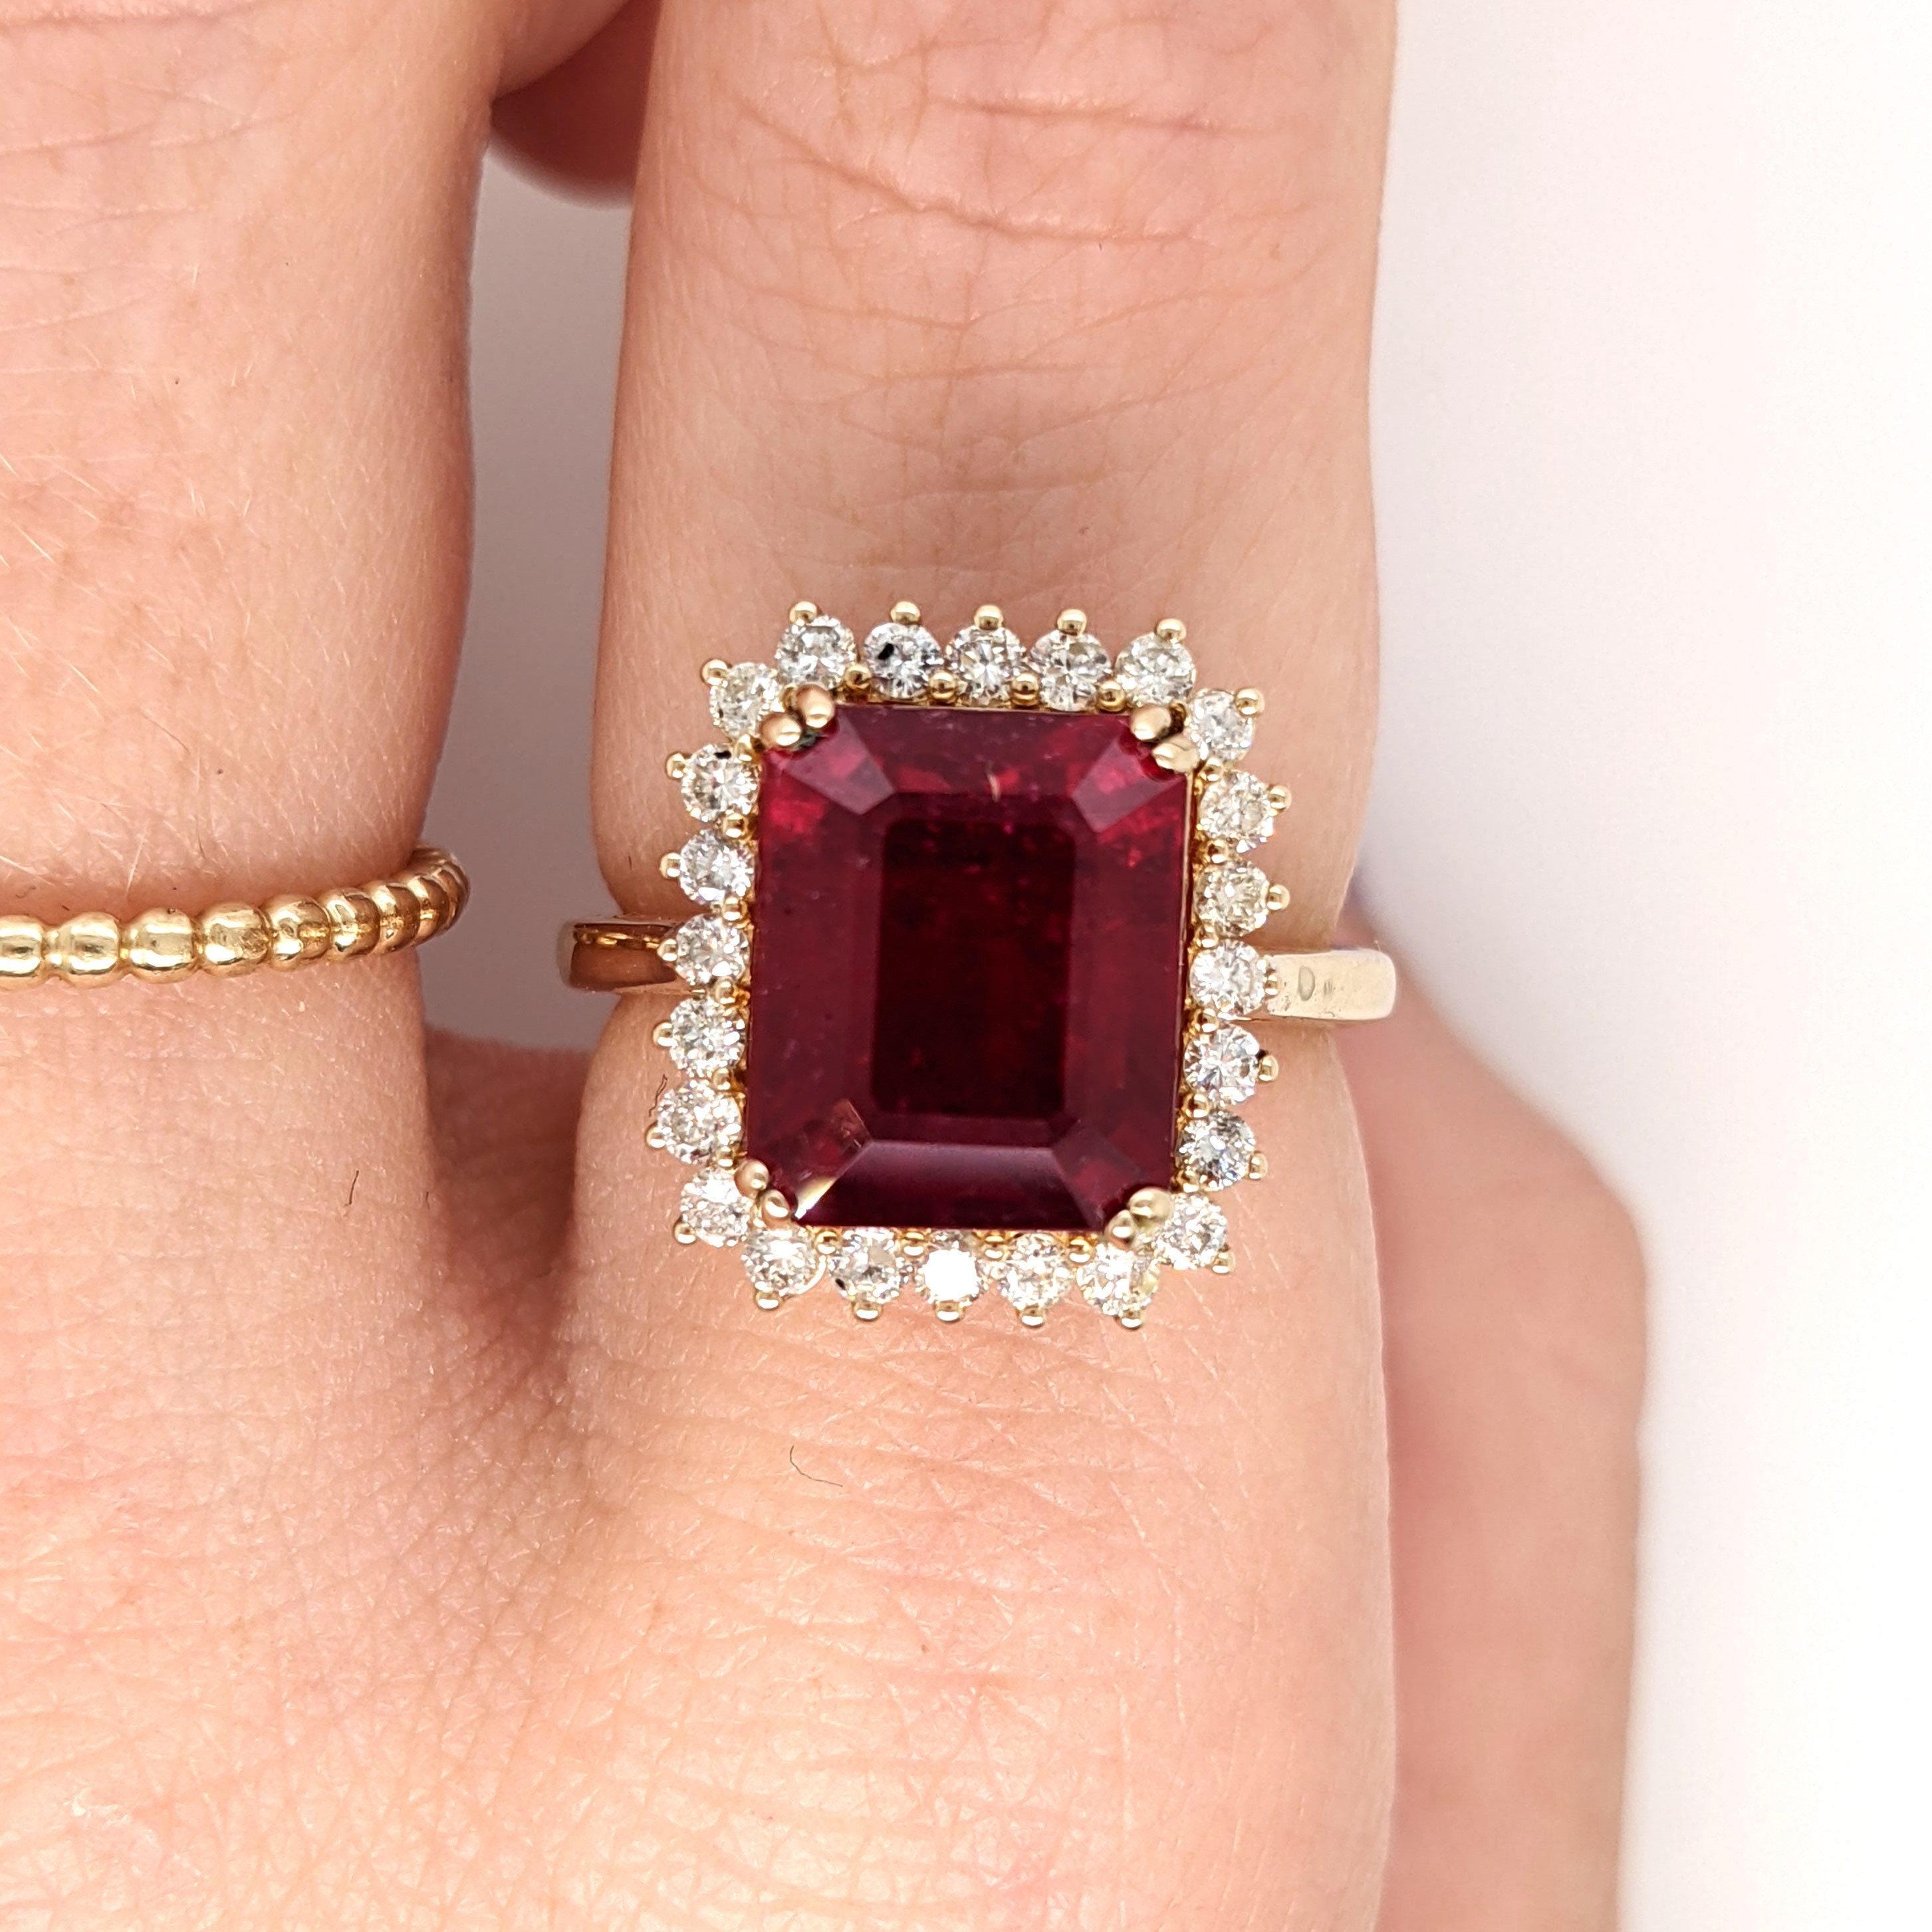 A gorgeous statement ruby ring perfect for flaunting! Claim this lovely Madagascar ruby set in solid 14k yellow gold and adorned with natural earth mined SI/G-H diamonds! A great option for July birthdays, or anyone who loves that pop of red and